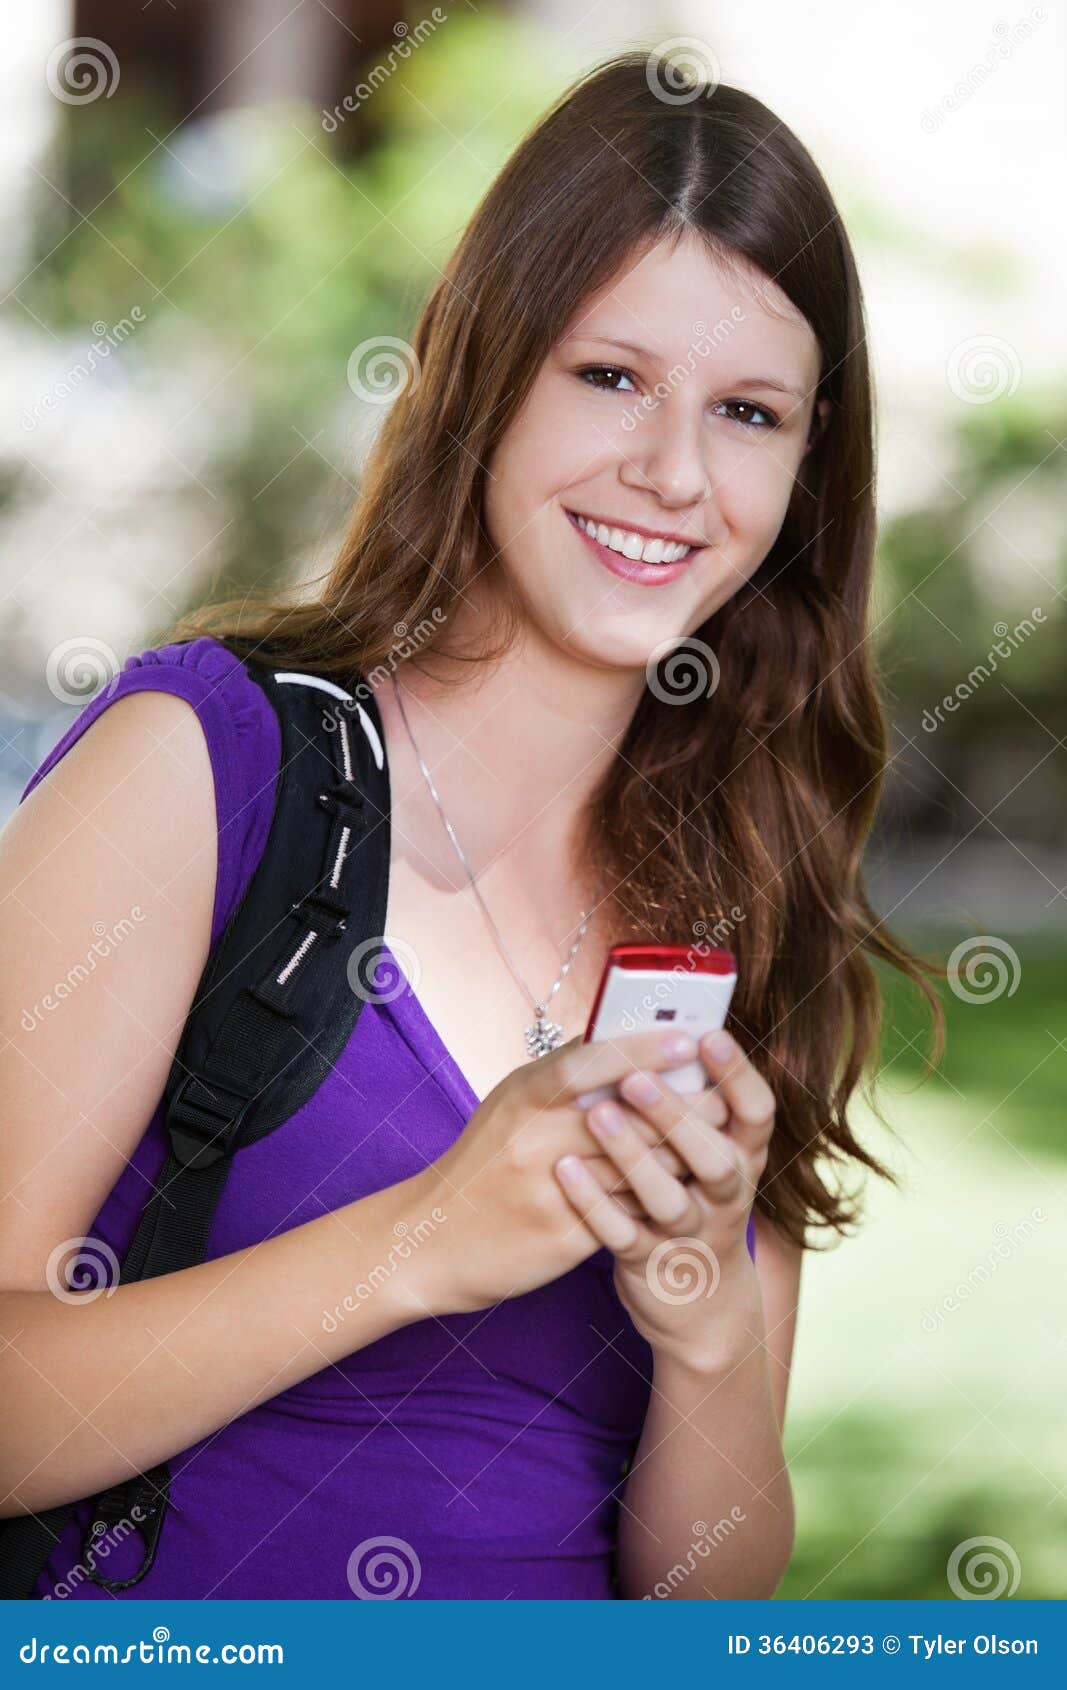 College Girl Holding Cell Phone Stock Image Image of 